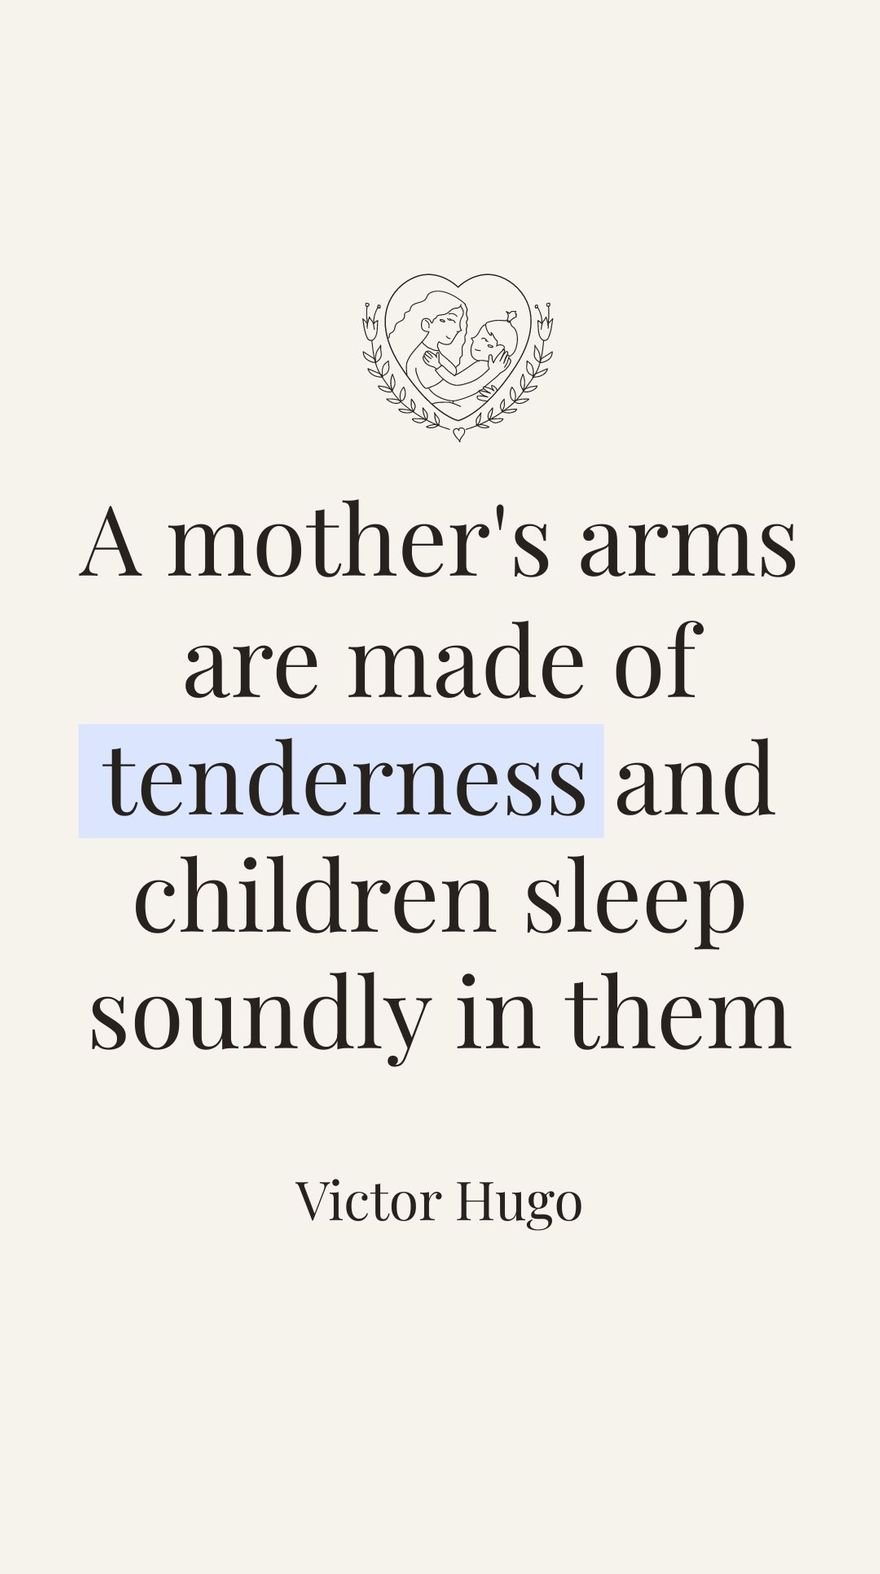 Victor Hugo - A mother's arms are made of tenderness and children sleep soundly in them.